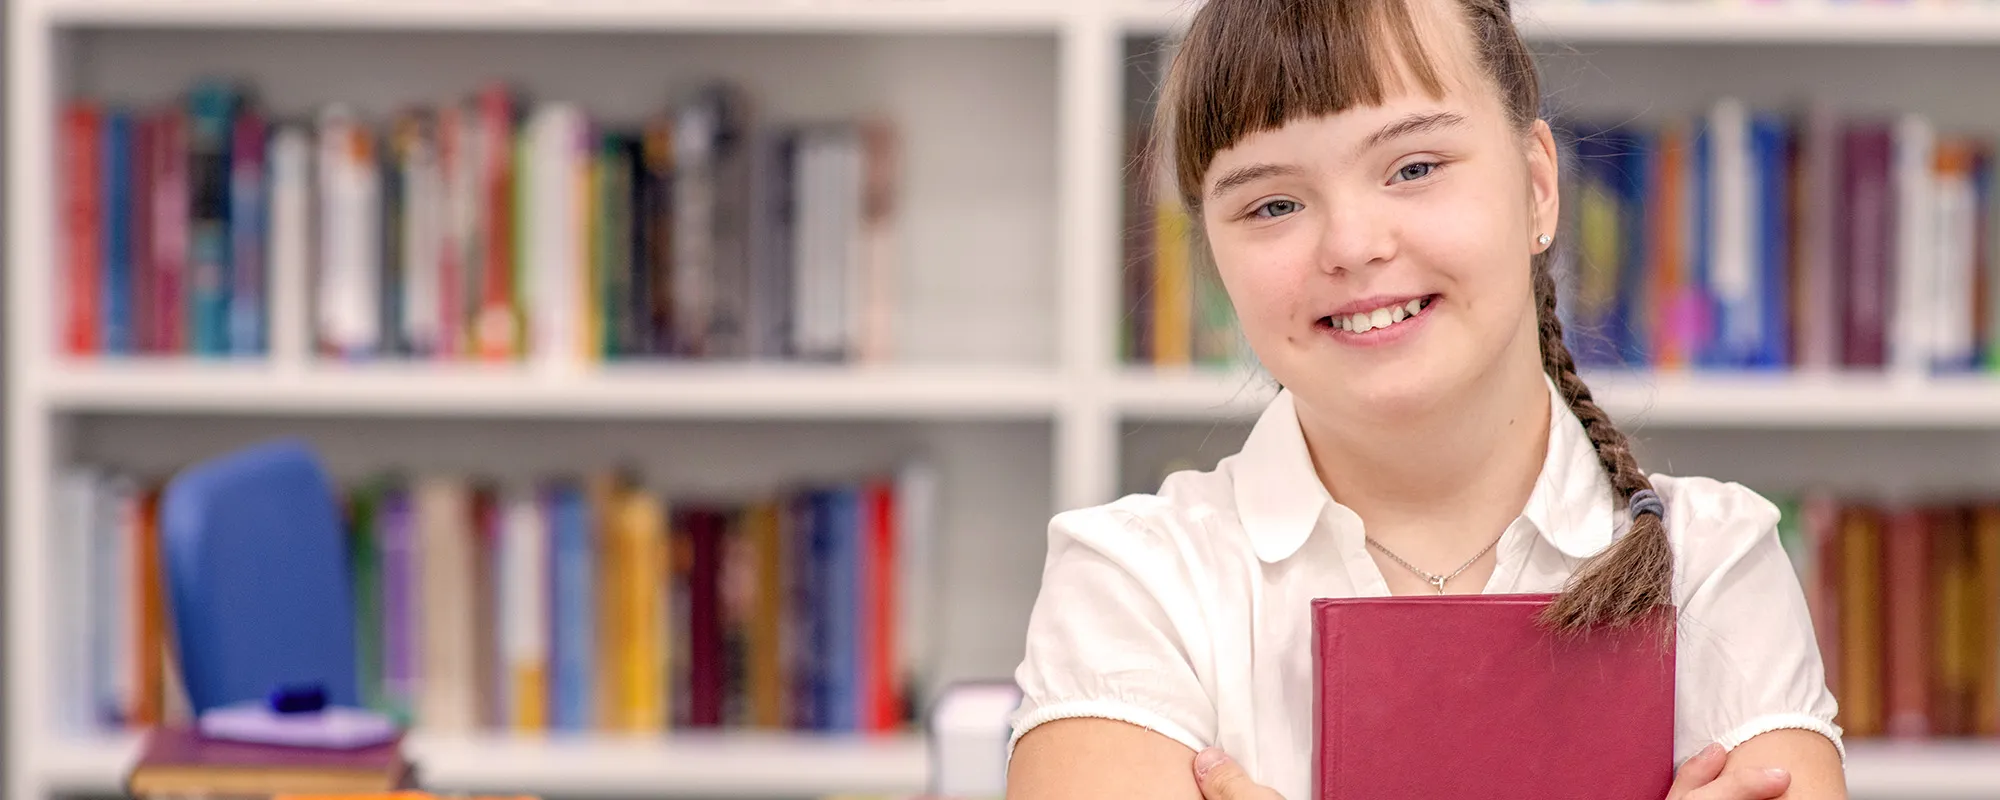 Girl holding red book